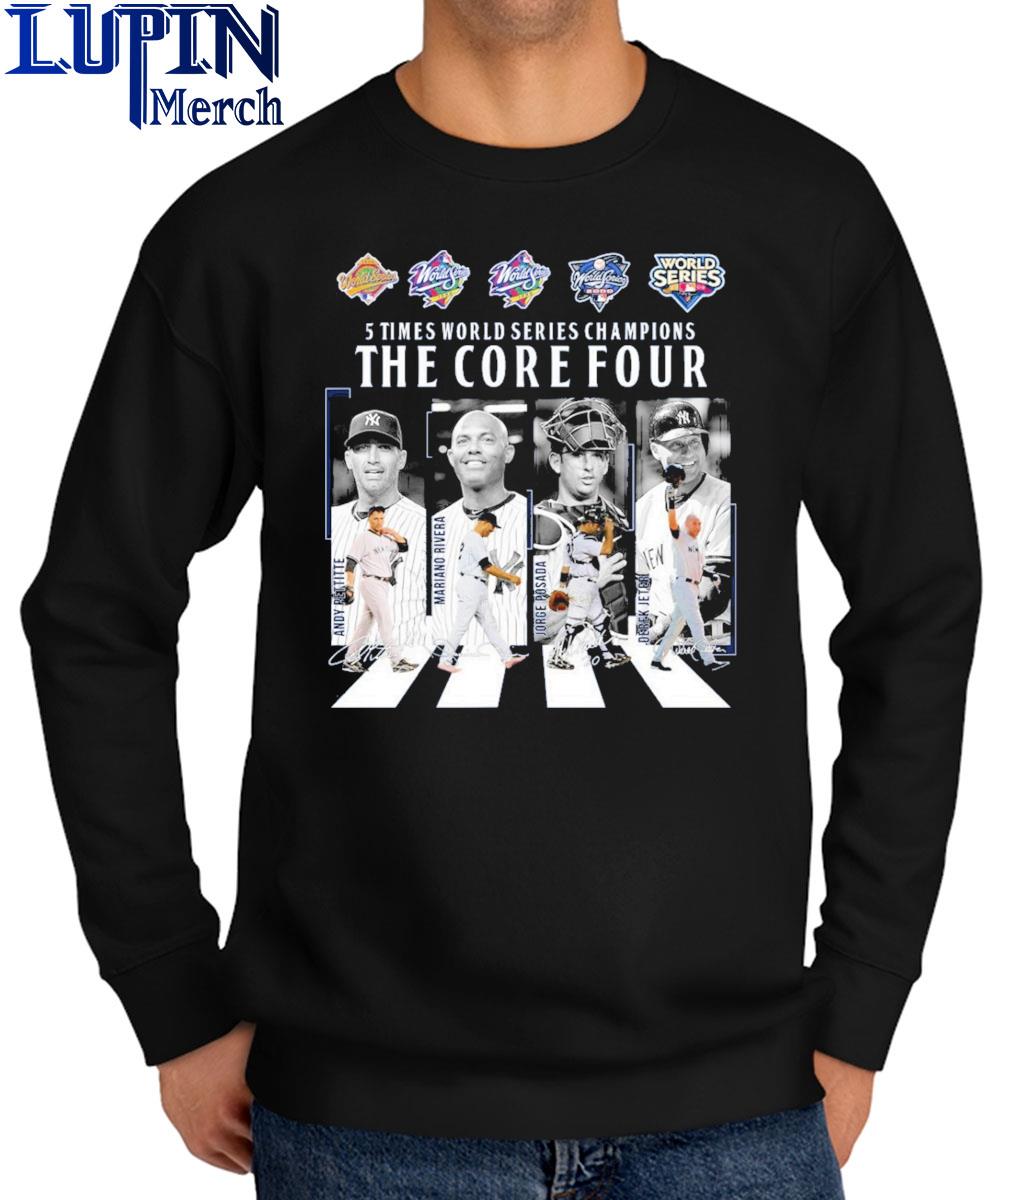 New York Yankees 5 times world series champions the core four